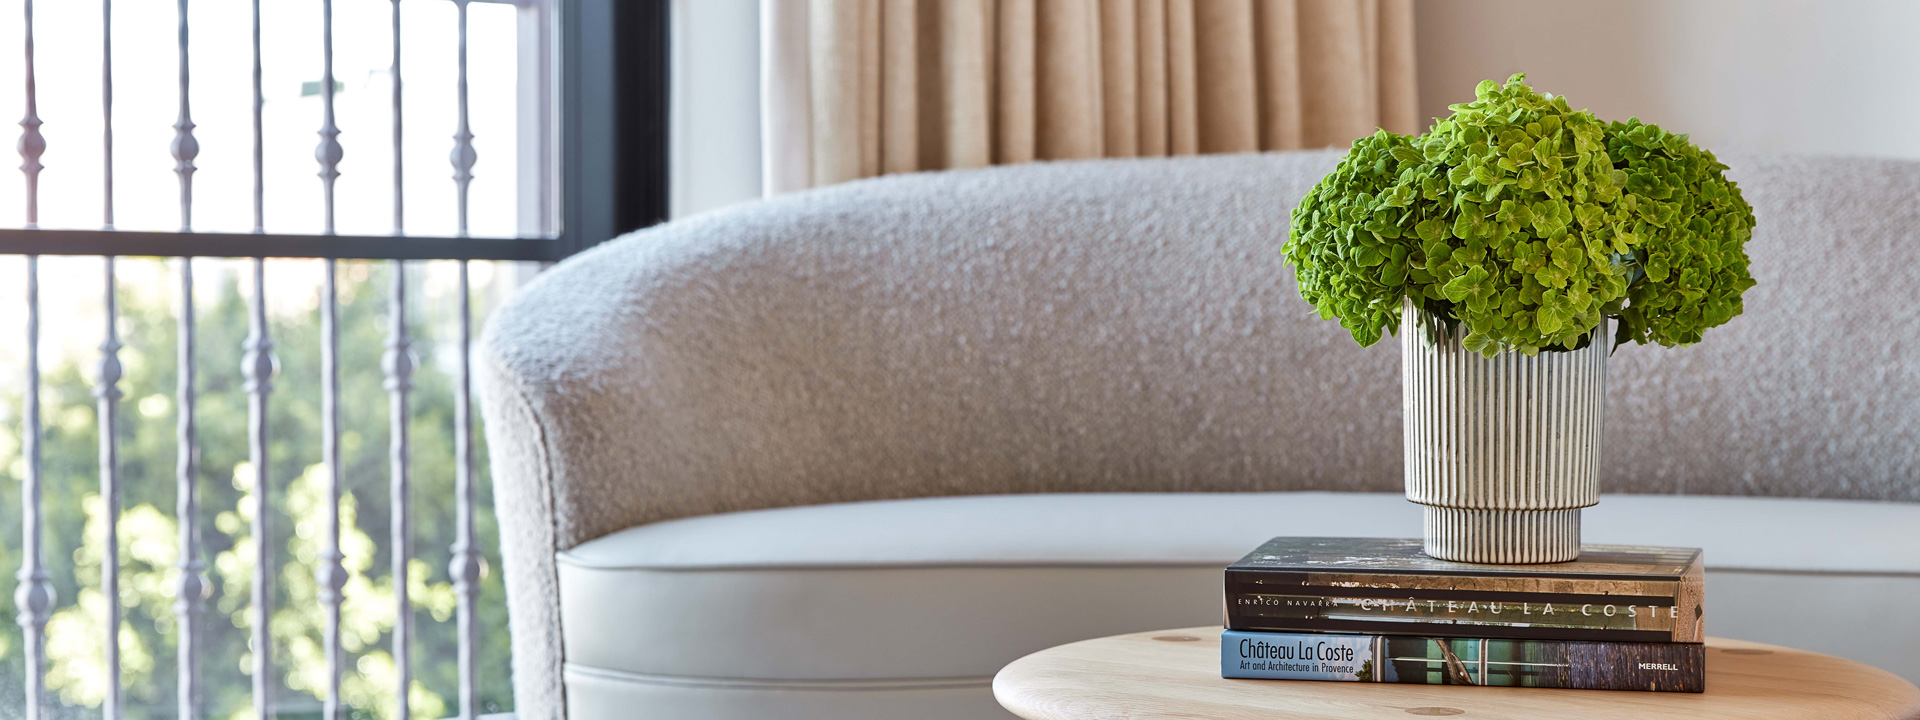 In the cozy lounge, a potted plant adorns a notebook on the coffee table, adding charm.